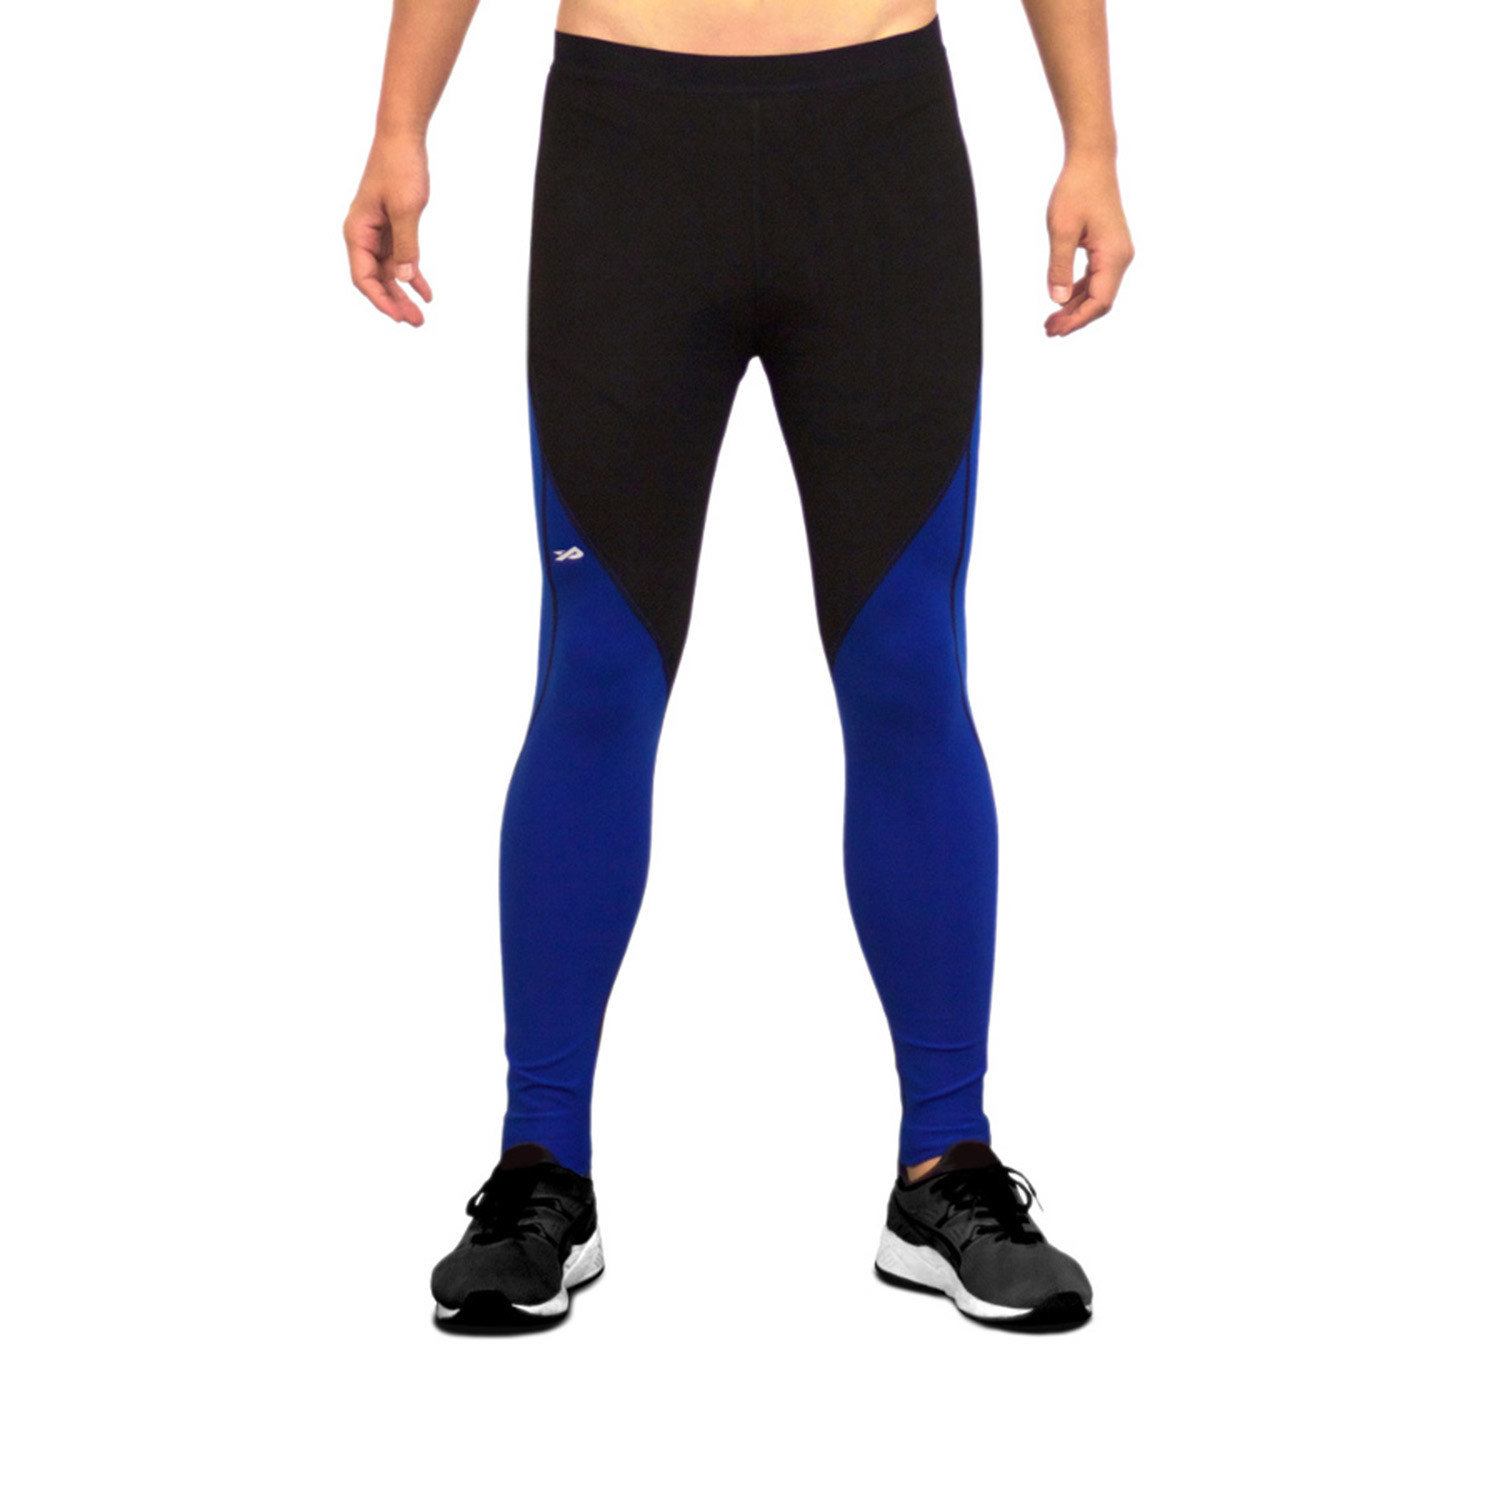 Physiclo Pro Resistance Full-Length Tights // Navy (Large